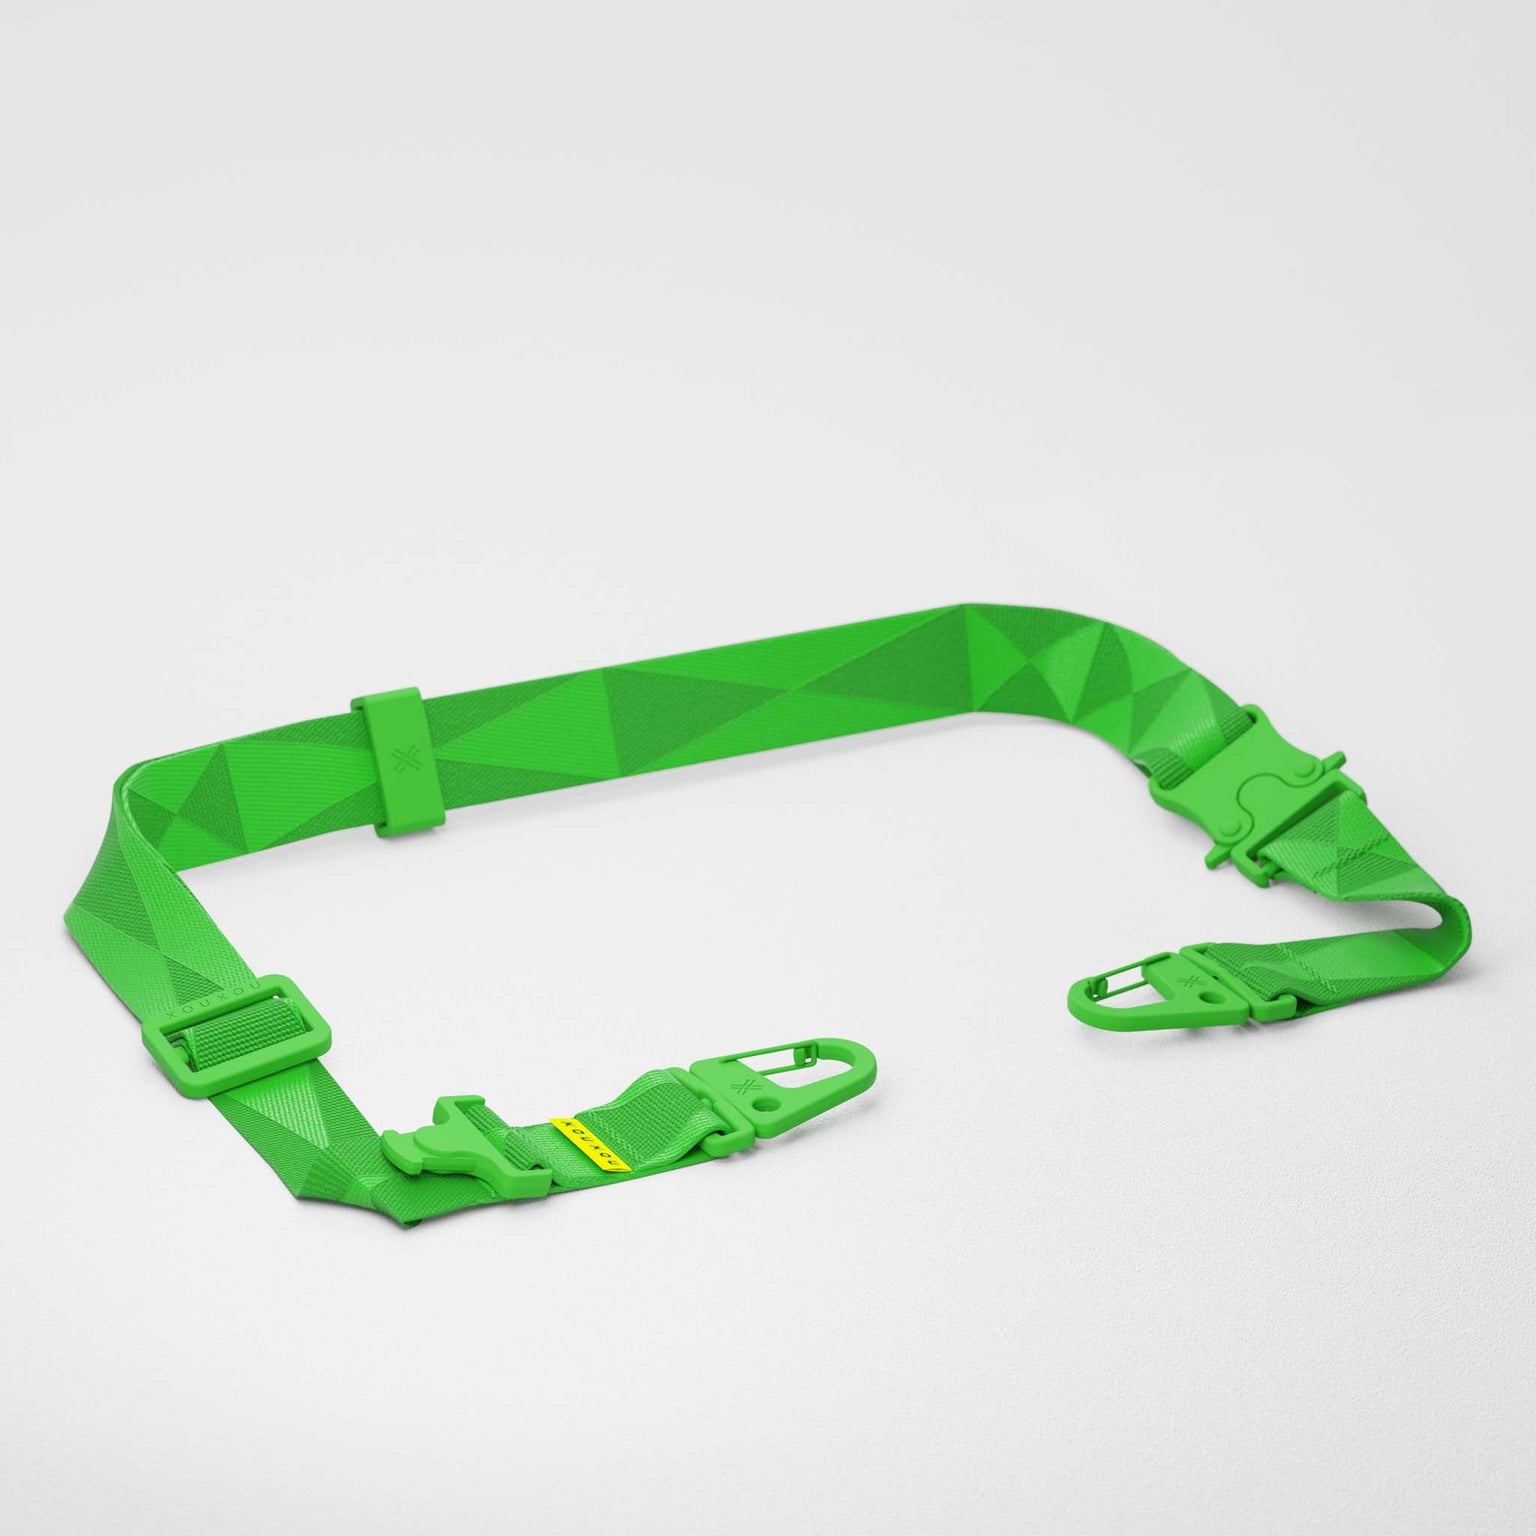 Adjustable modular Phone Case Strap in Acid green with carabiner | XOUXOU